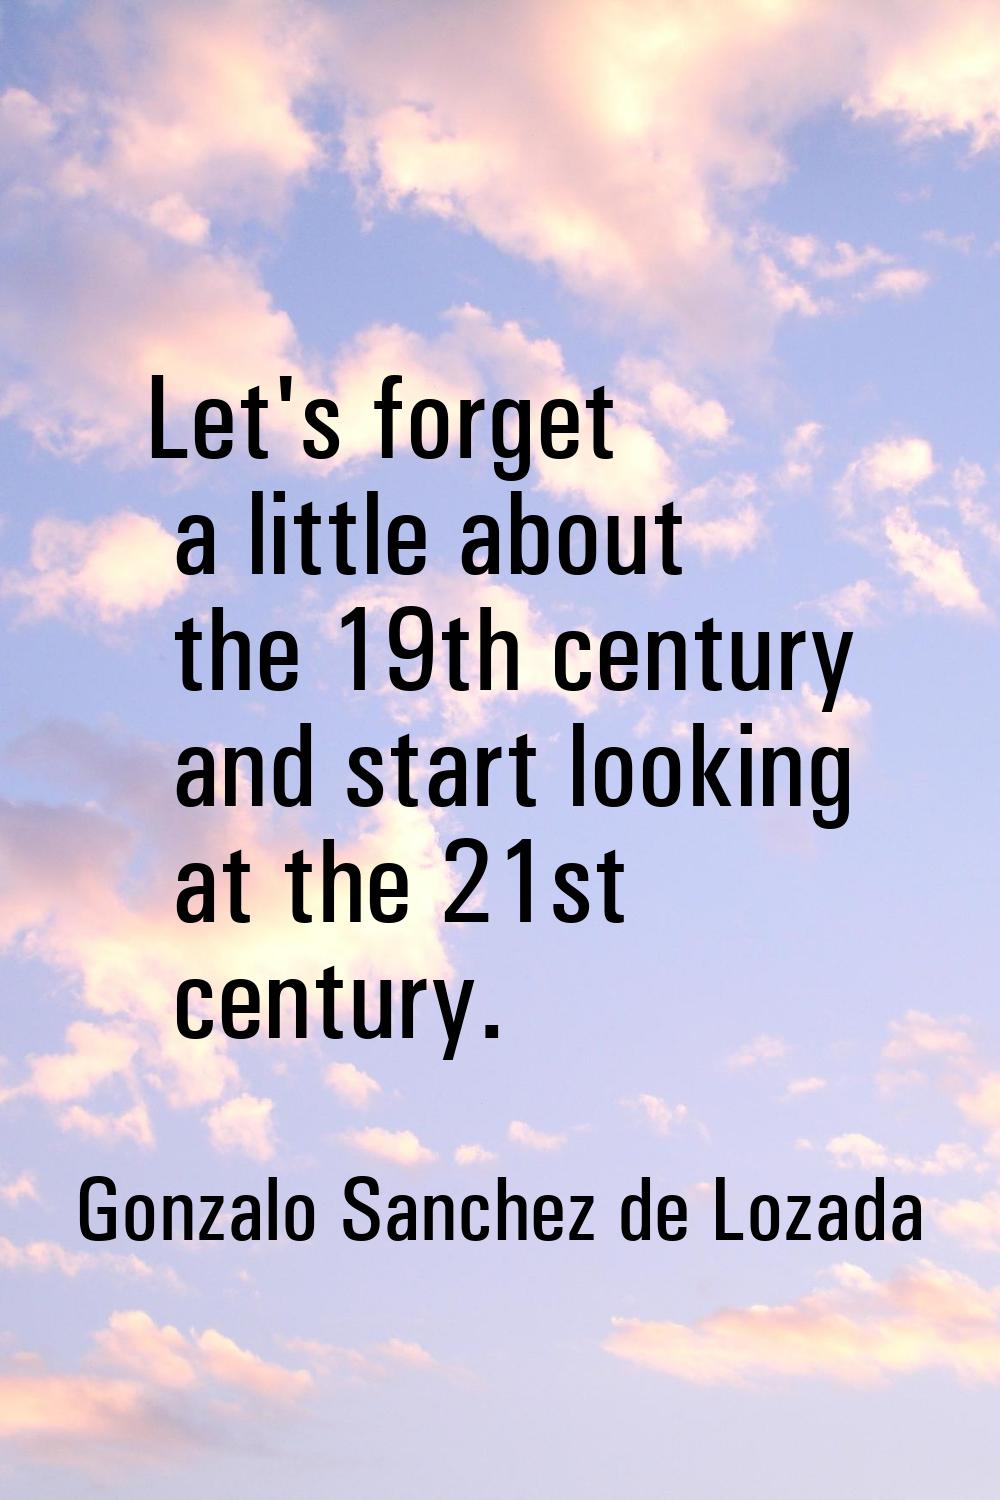 Let's forget a little about the 19th century and start looking at the 21st century.